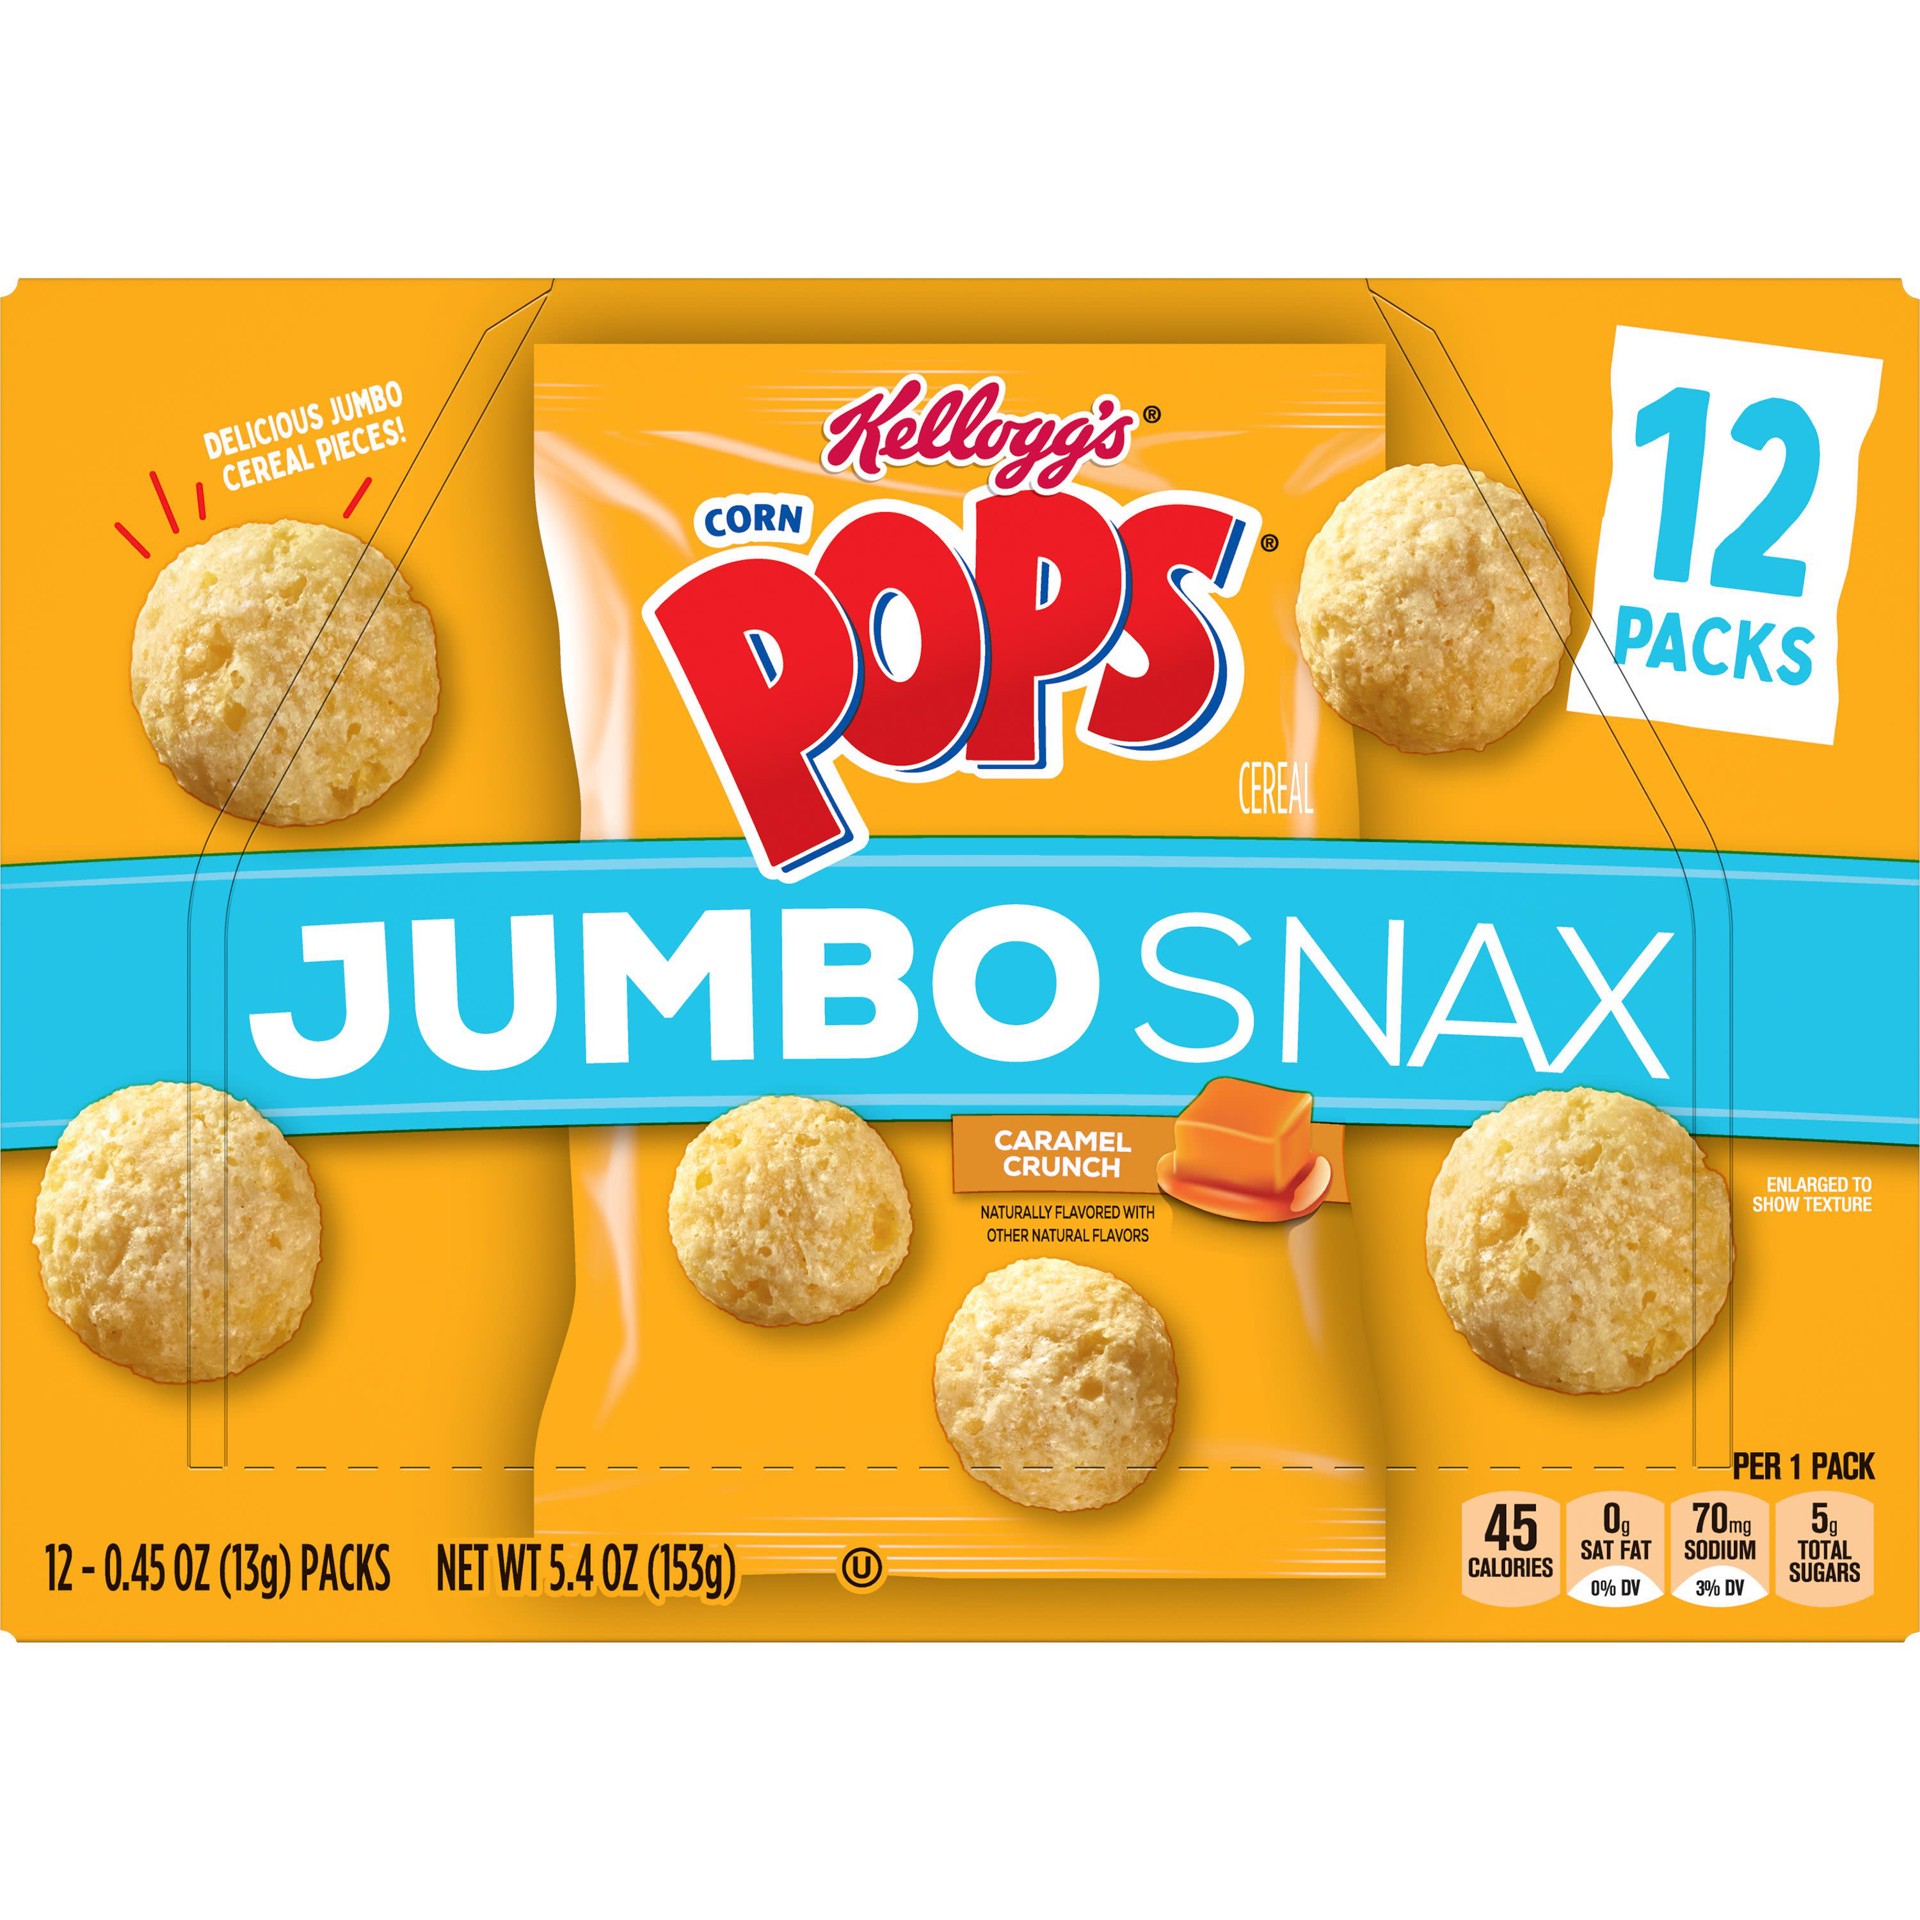 slide 2 of 5, Corn Pops Kellogg's Corn Pops Jumbo Snax, Cereal, Caramel Crunch, Perfect for Anytime Snacking, 5.4oz Box, 12 Count, 5.4 oz